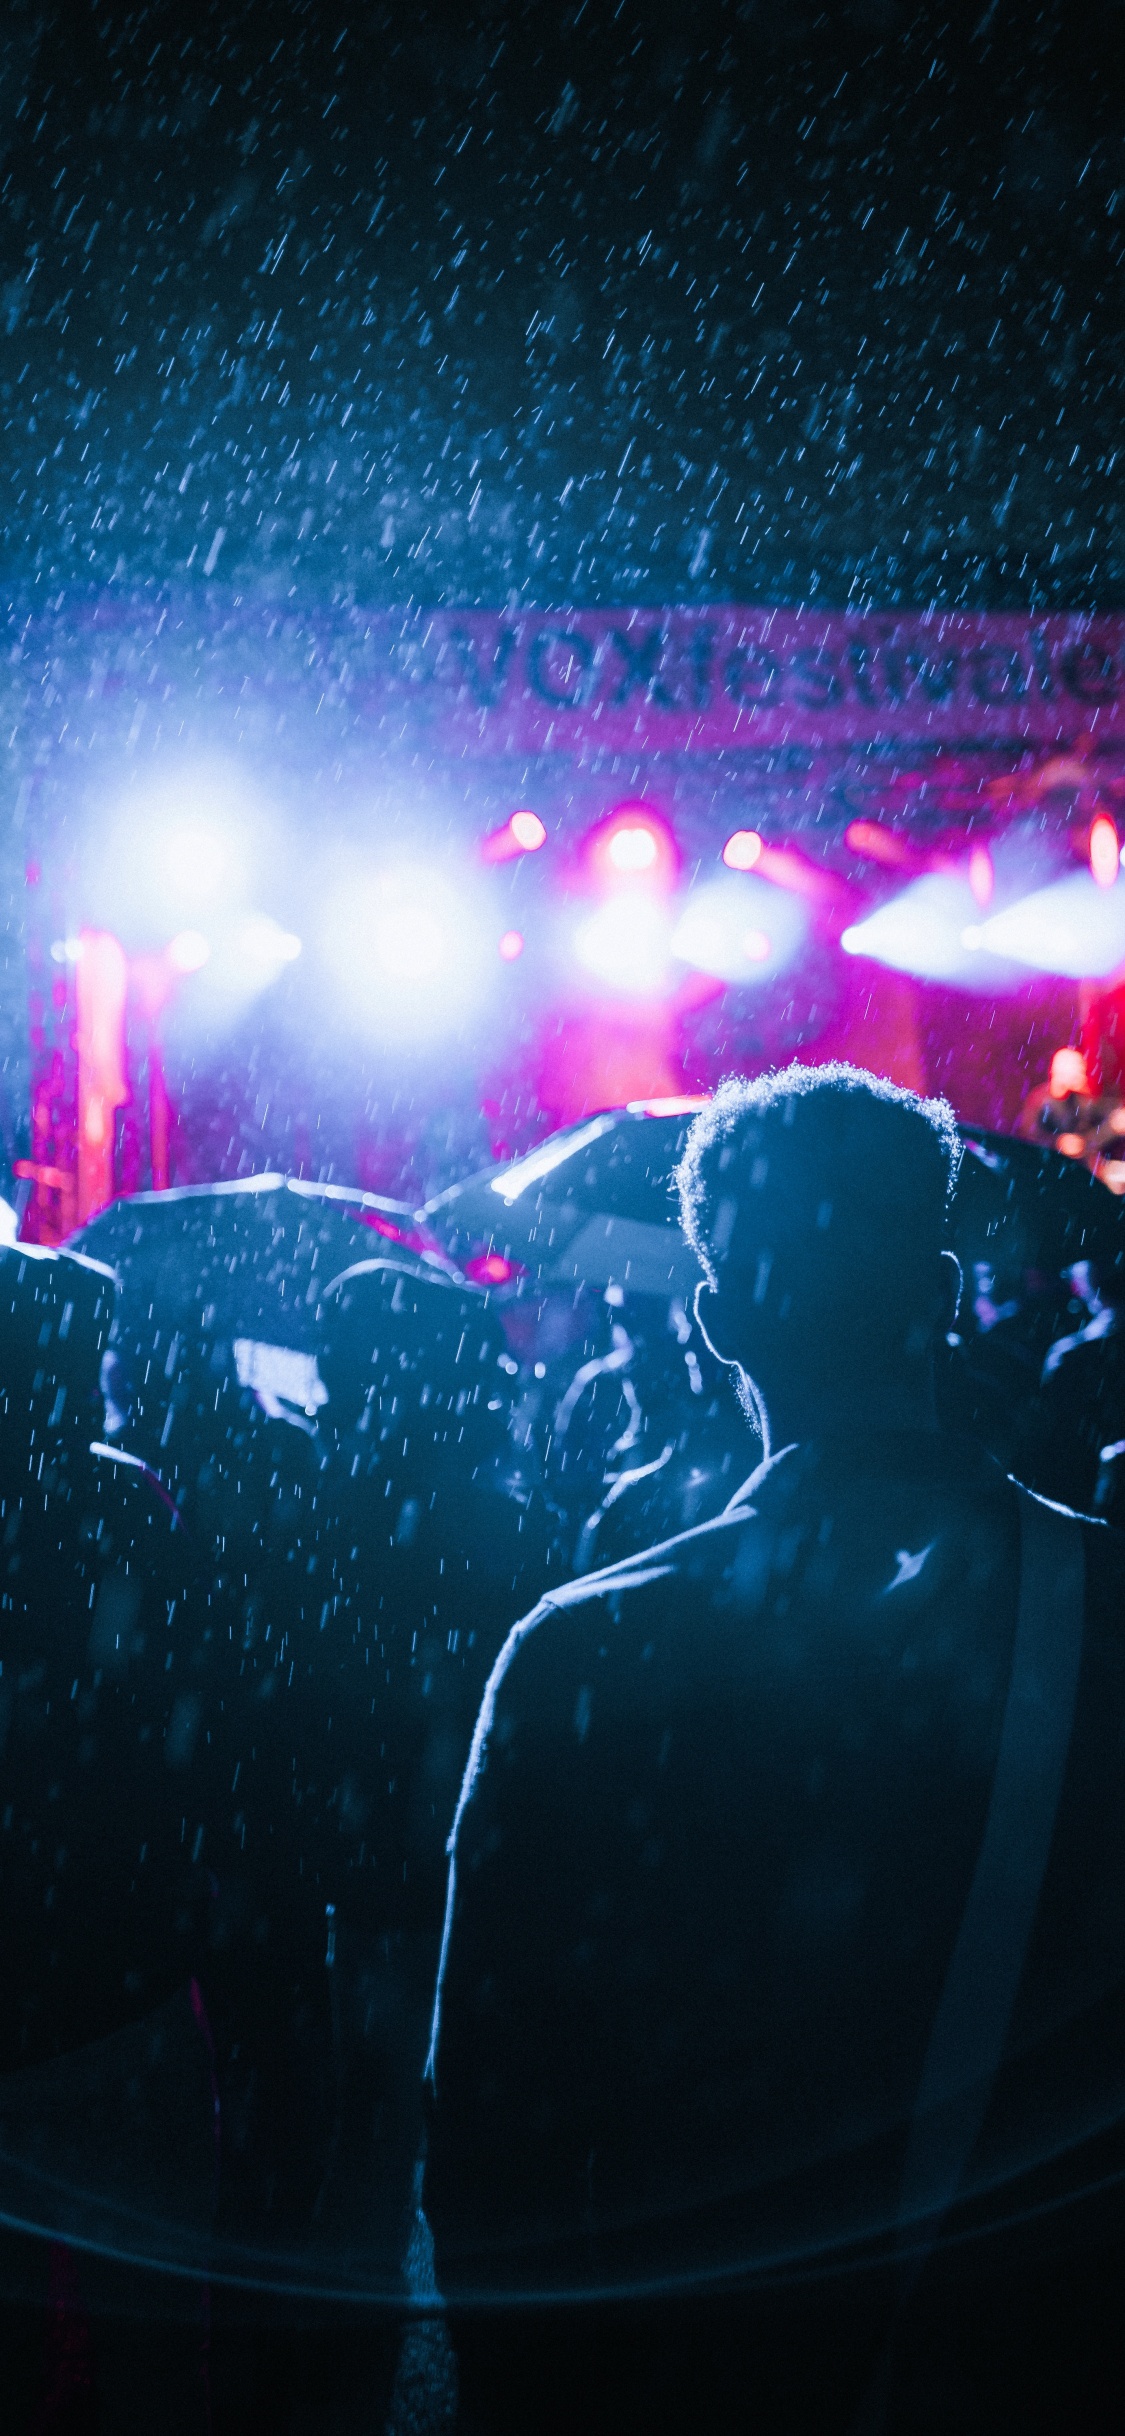 Crowd, Concert, Performance, Stage, Purple. Wallpaper in 1125x2436 Resolution